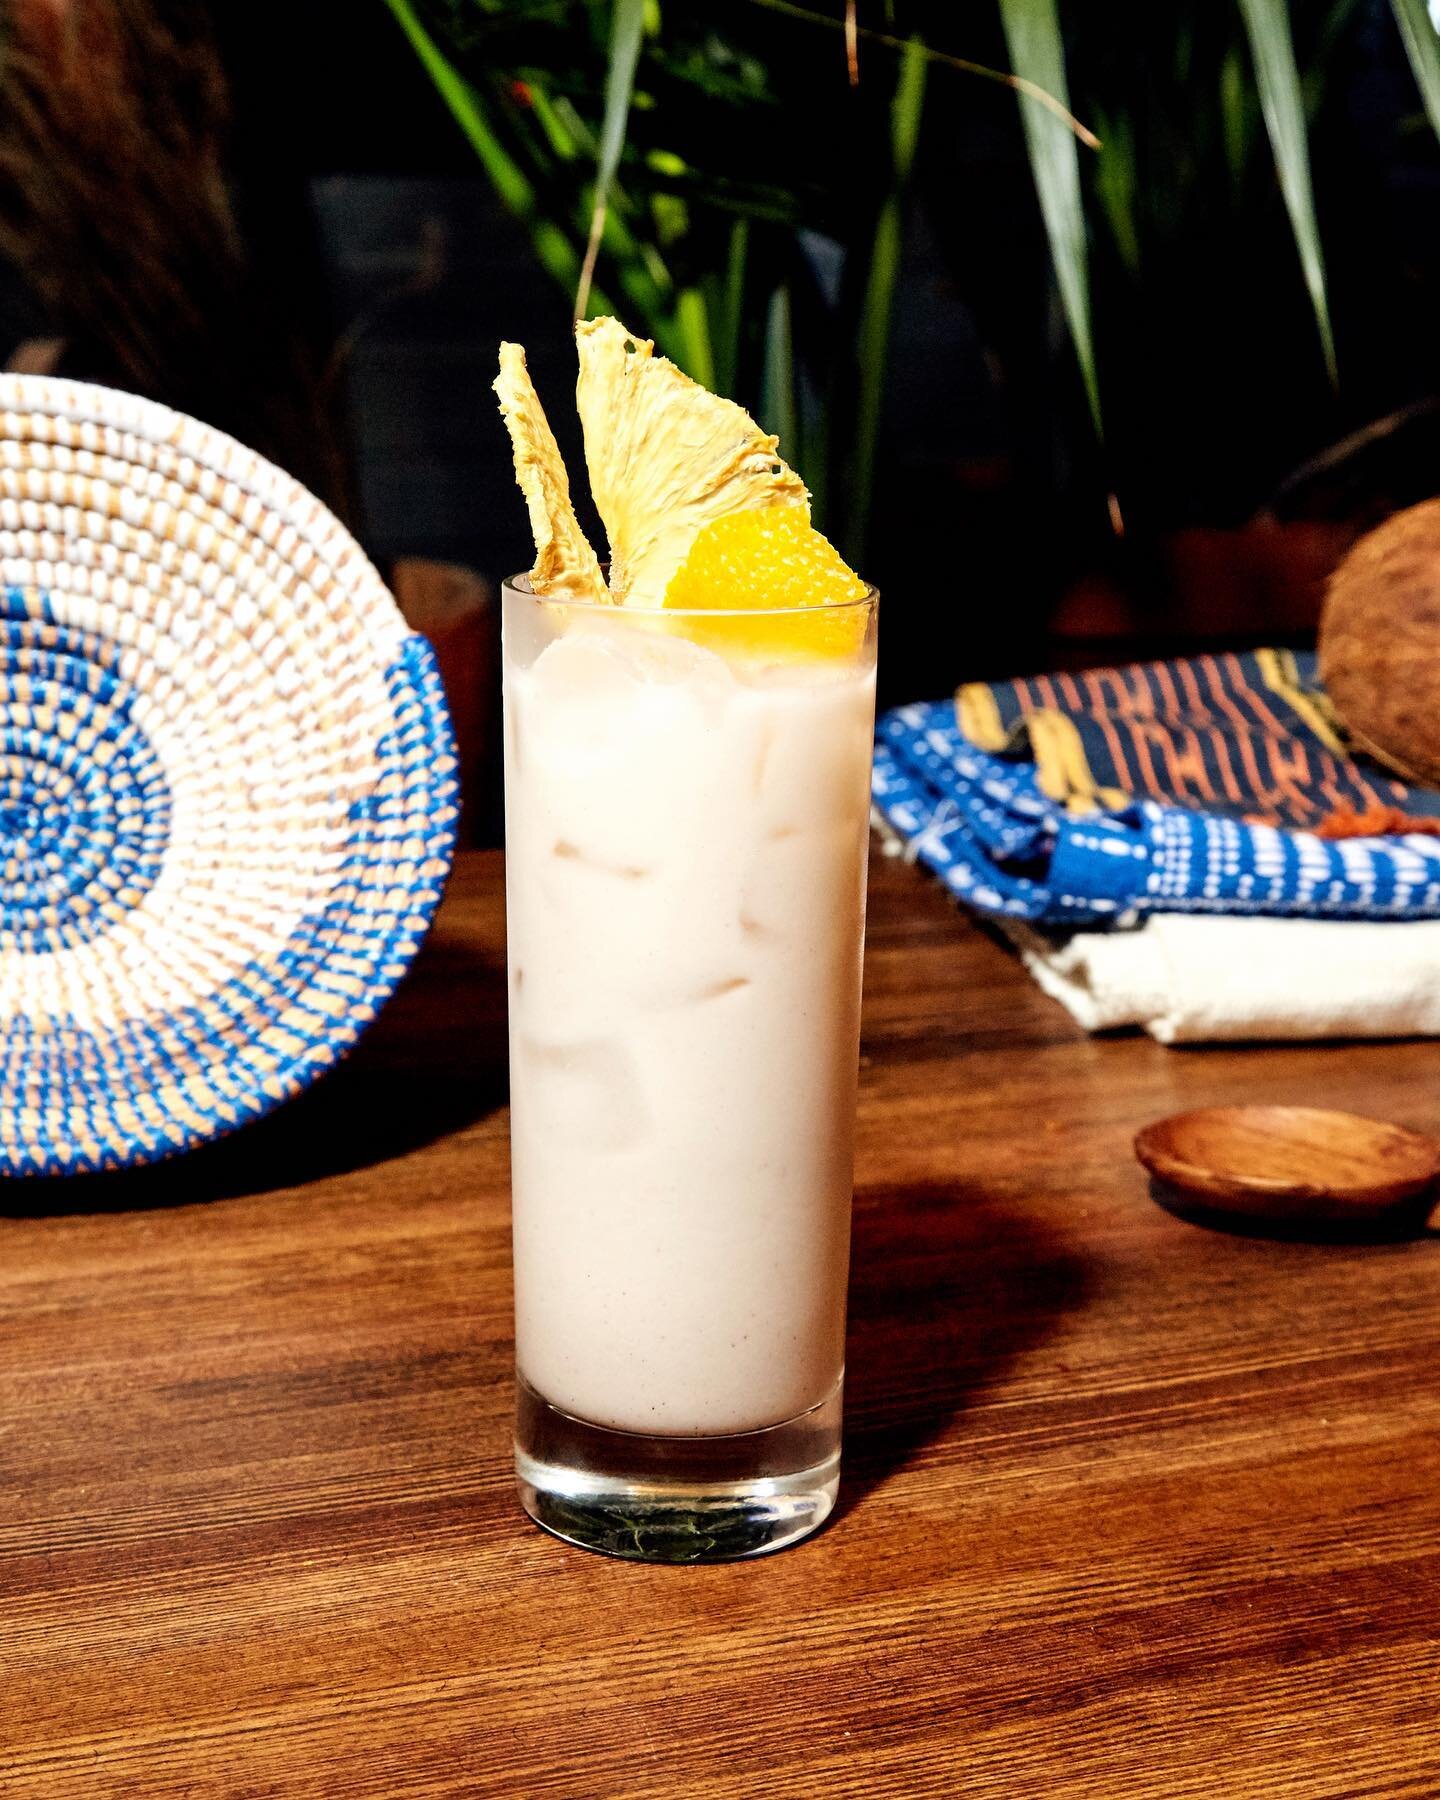 You + Sideways Baobab at Teranga. Indoor and Outdoor Dining Available. #WelcomeHome #ItsTeranga 

Try one of our signature cocktails:

Lac Rose Bissap Mojito
Sideways Baobab w/ Coconut Rum
Medina Ginger Mezcal Margarita
Teranga Sunrise Margarita w/ B